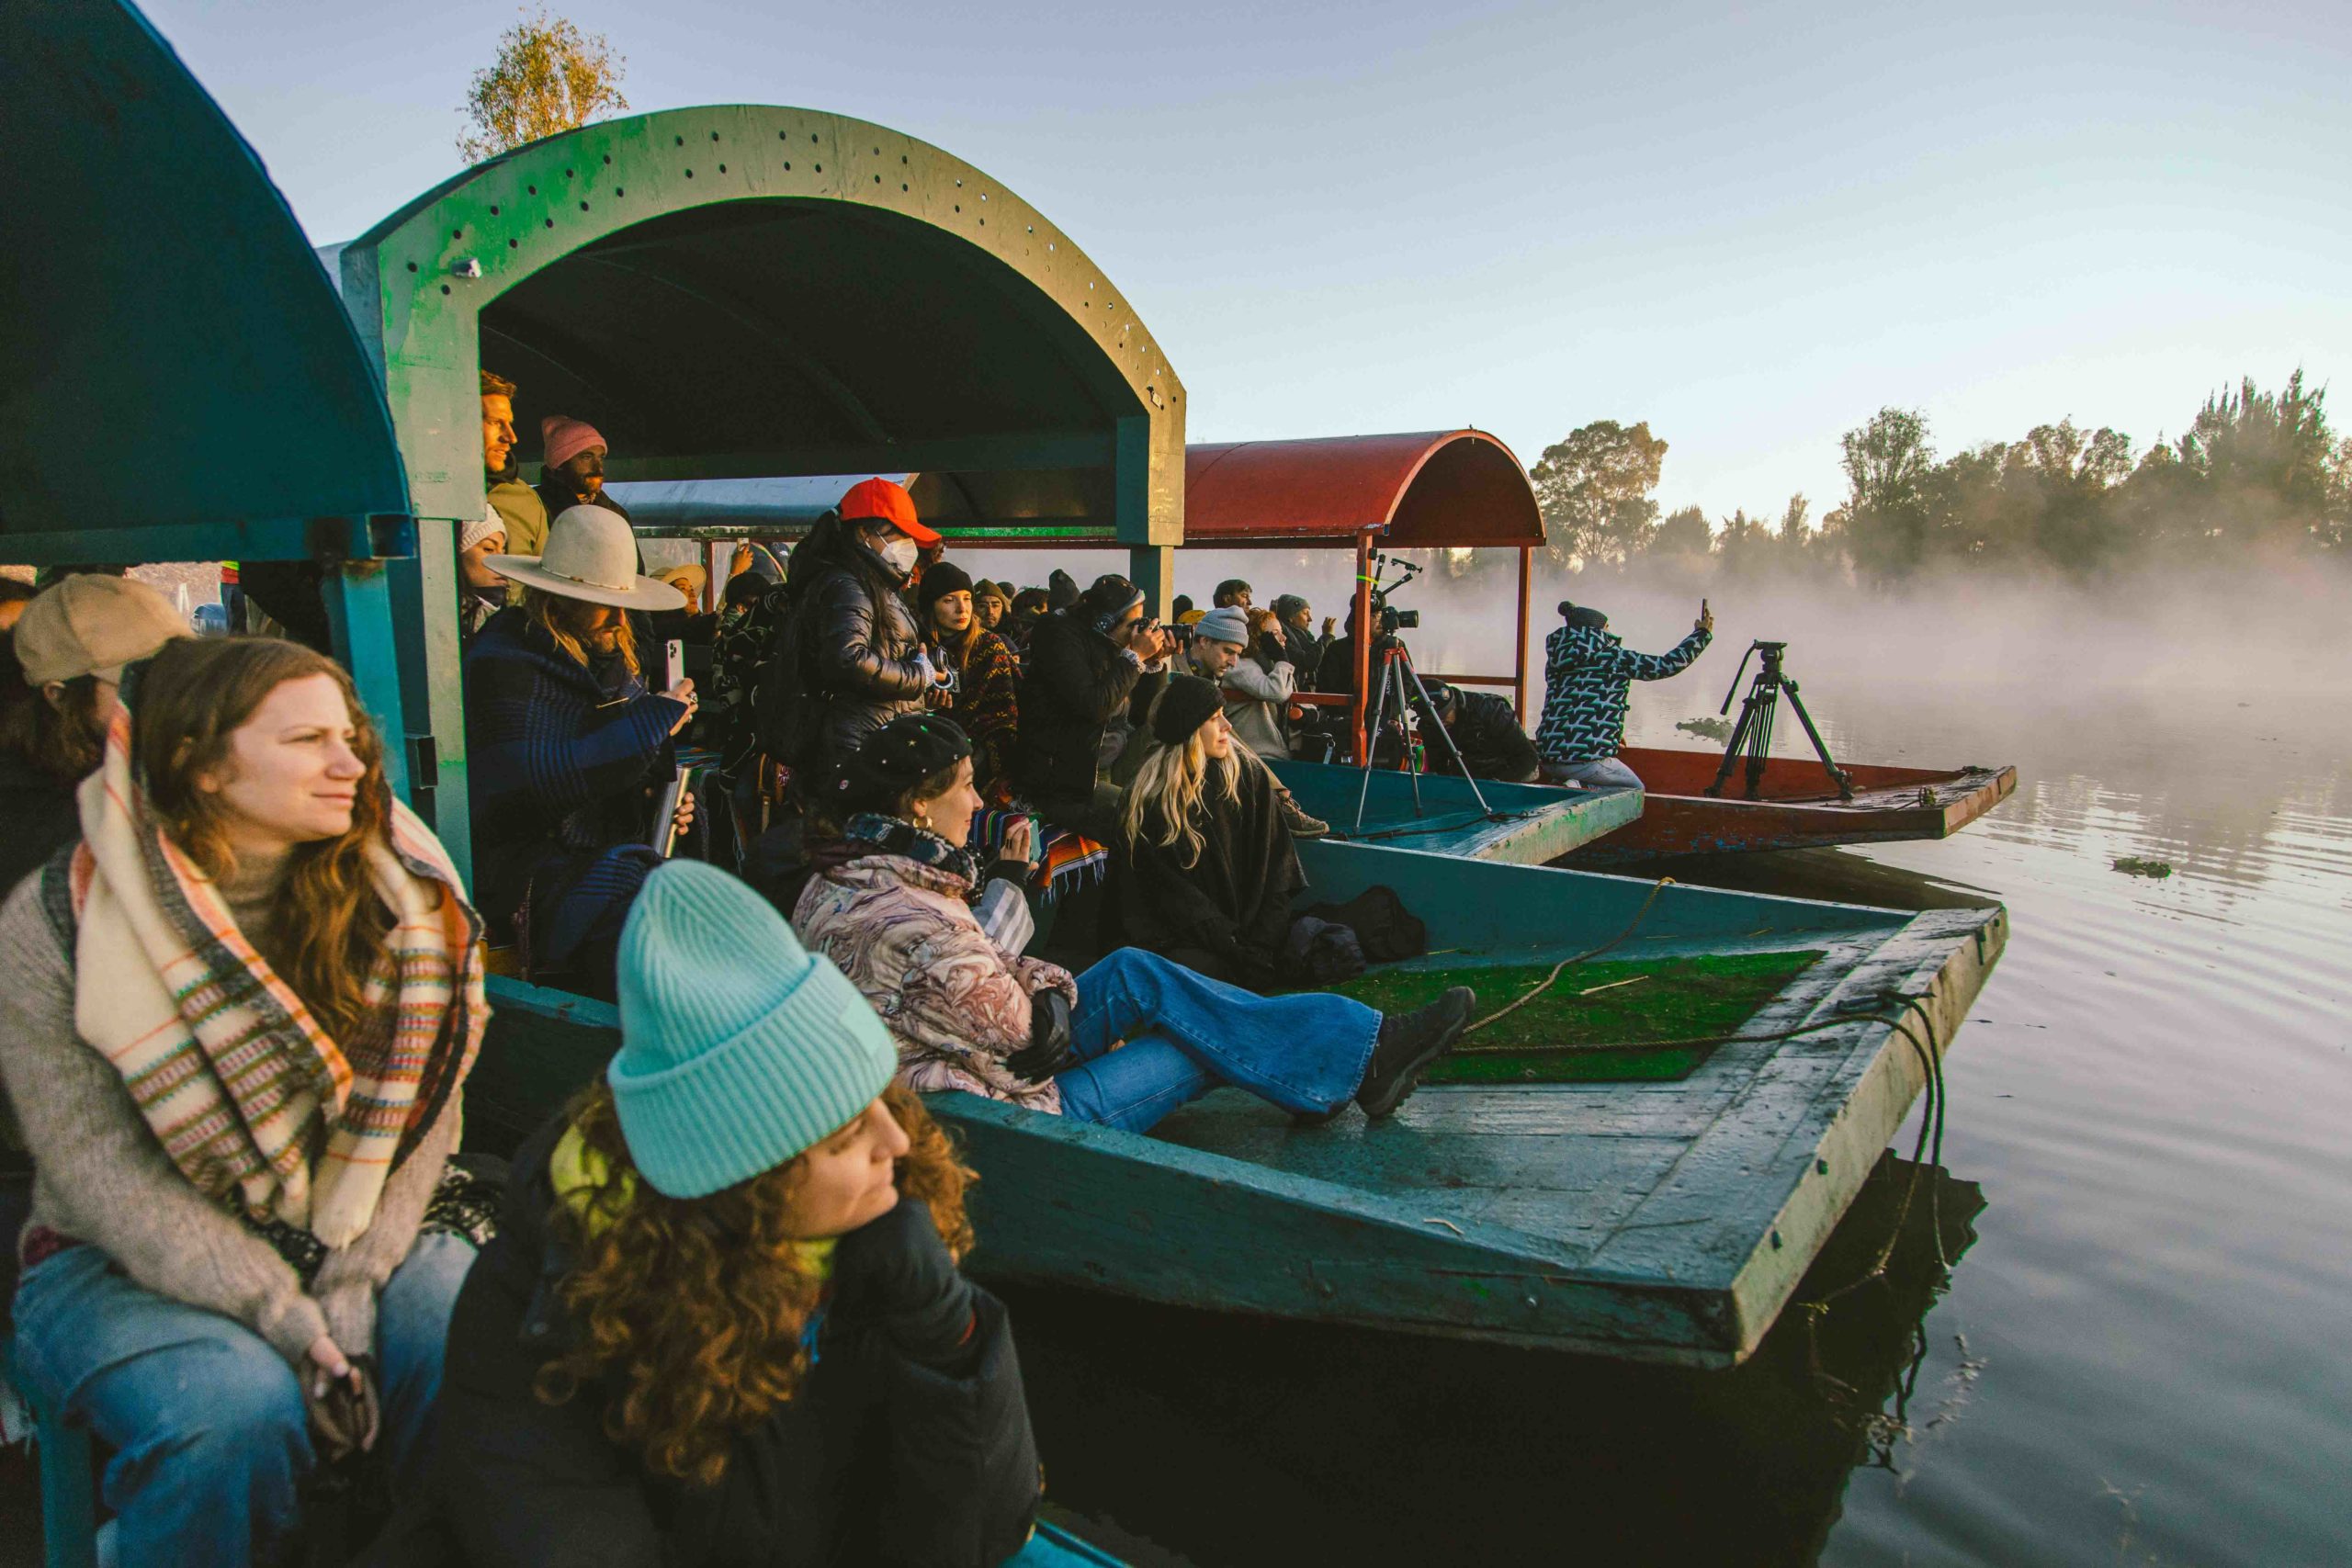 65 people attended the sunrise floating concert